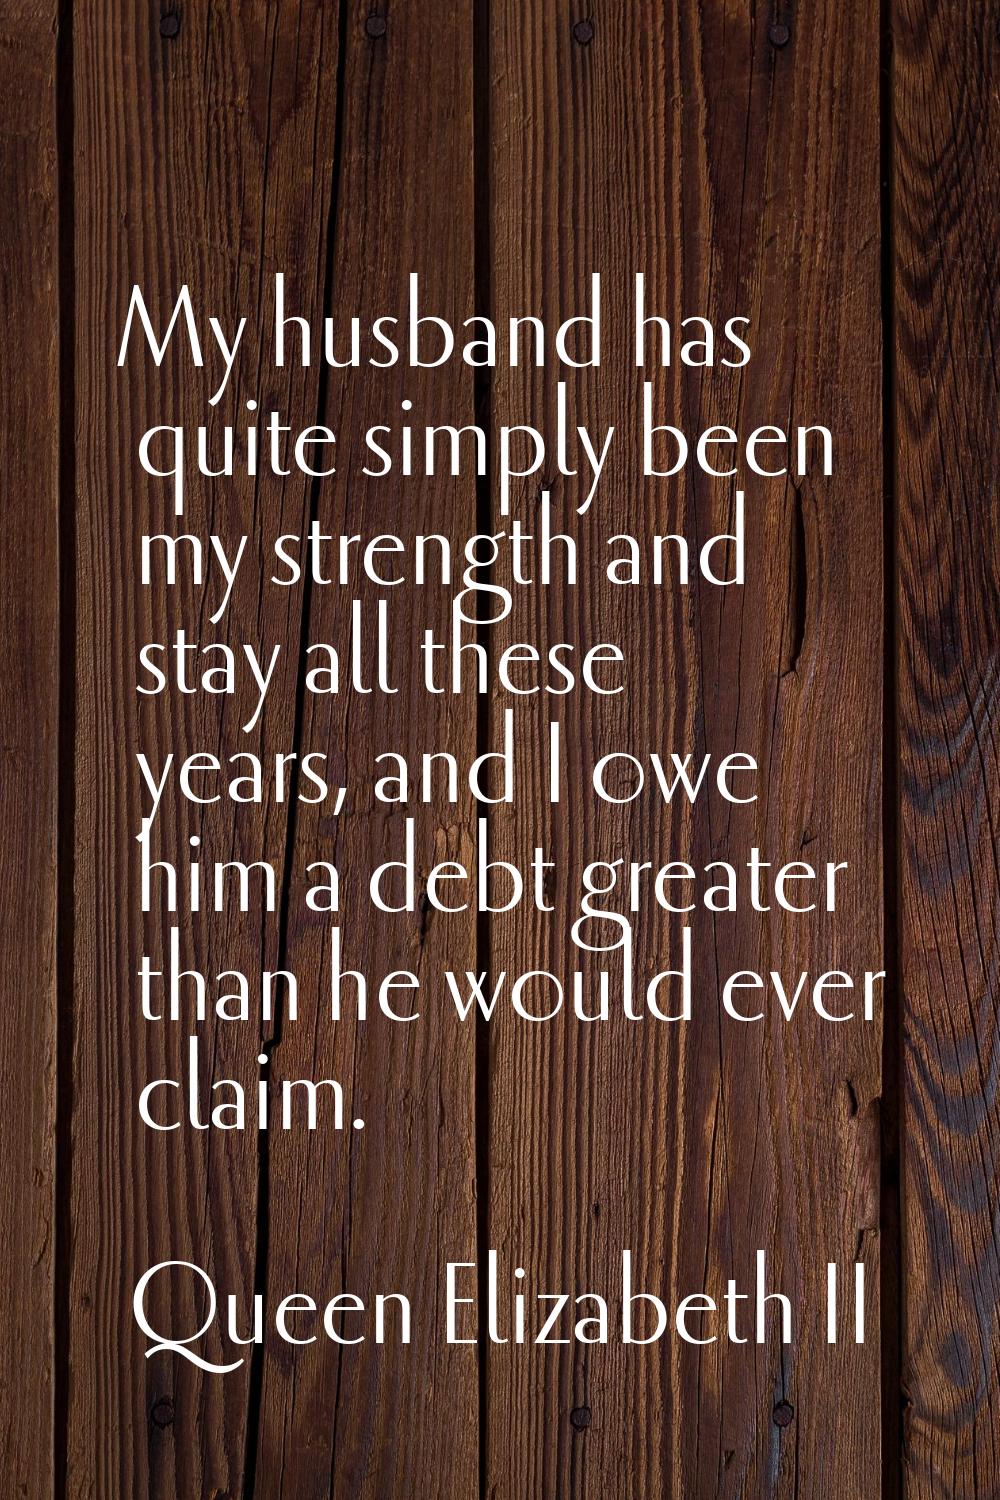 My husband has quite simply been my strength and stay all these years, and I owe him a debt greater